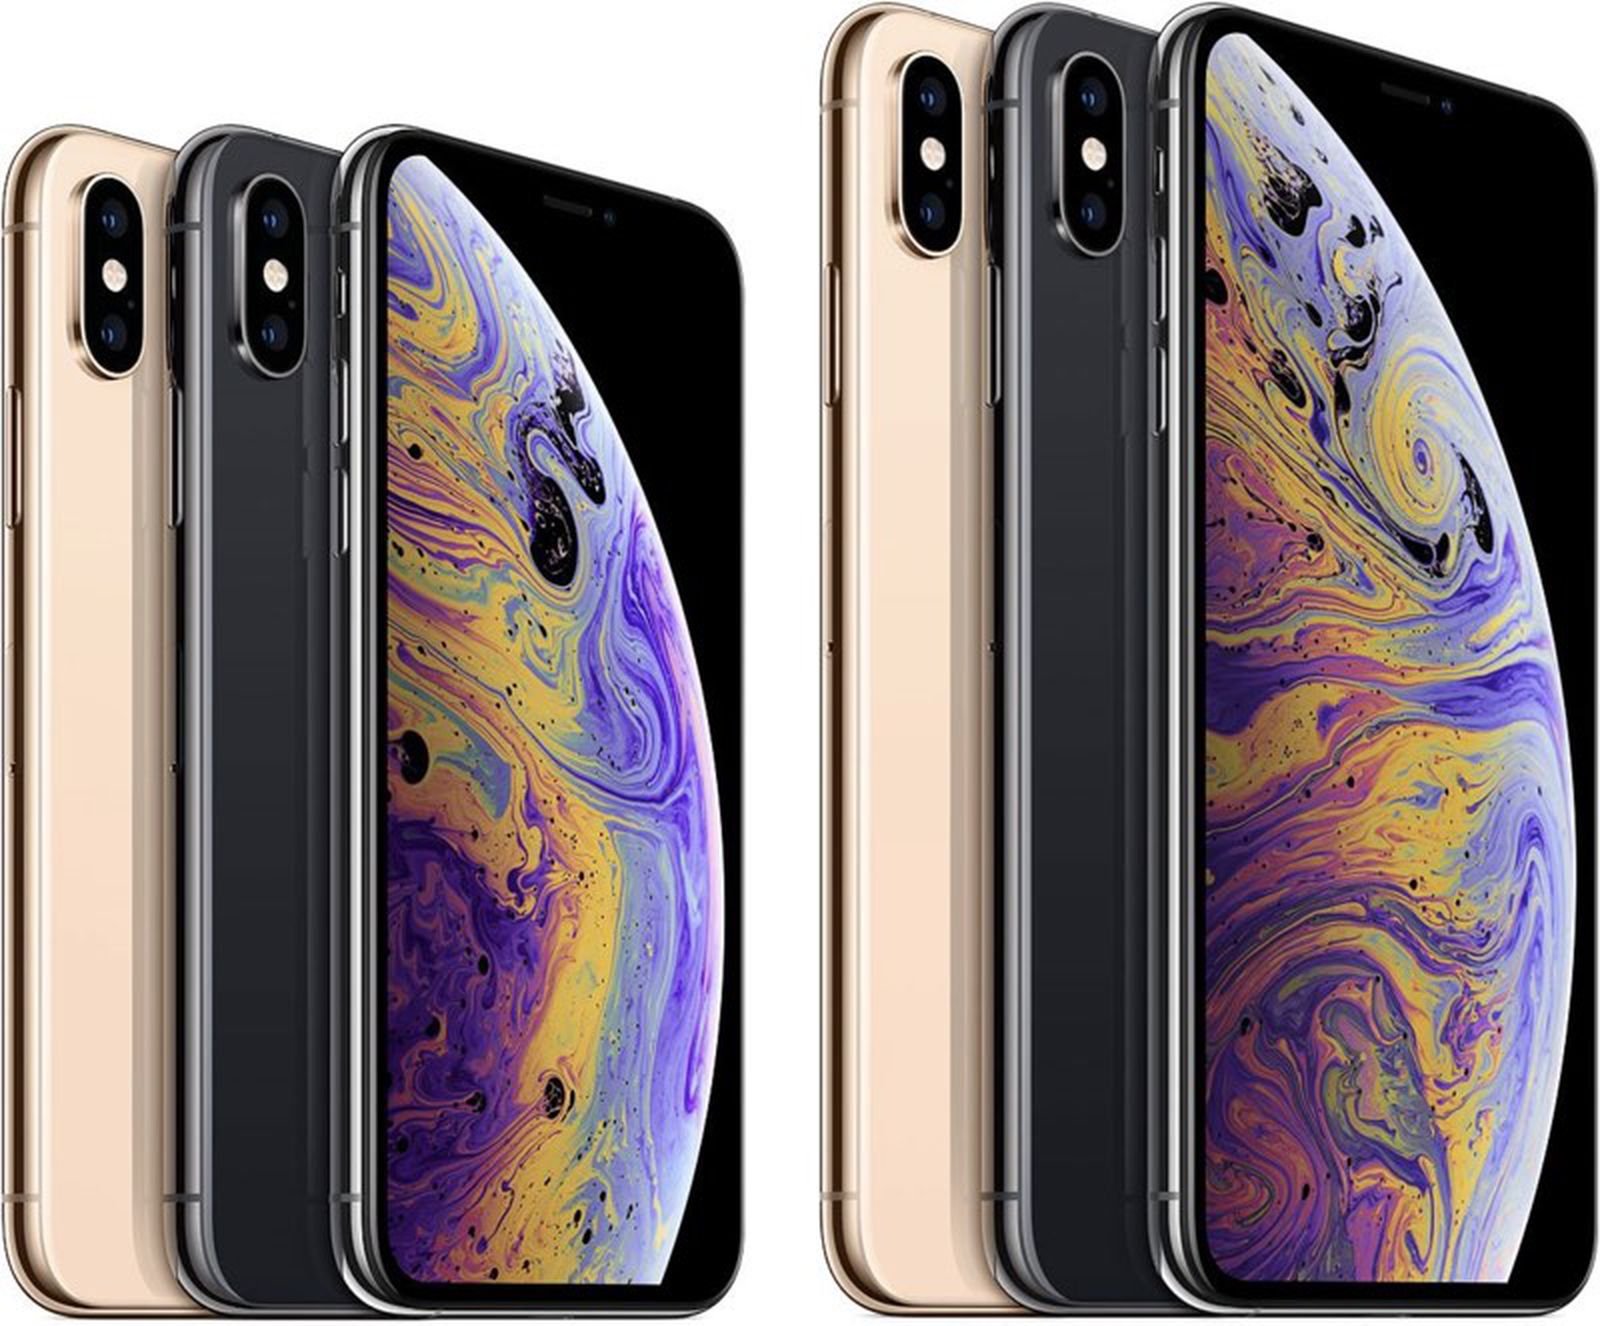 Disarmament Rudyard Kipling alliance Kuo: iPhone XS Max Significantly Outselling iPhone XS, 256GB Most Popular,  512GB Subject to Serious Shortage - MacRumors